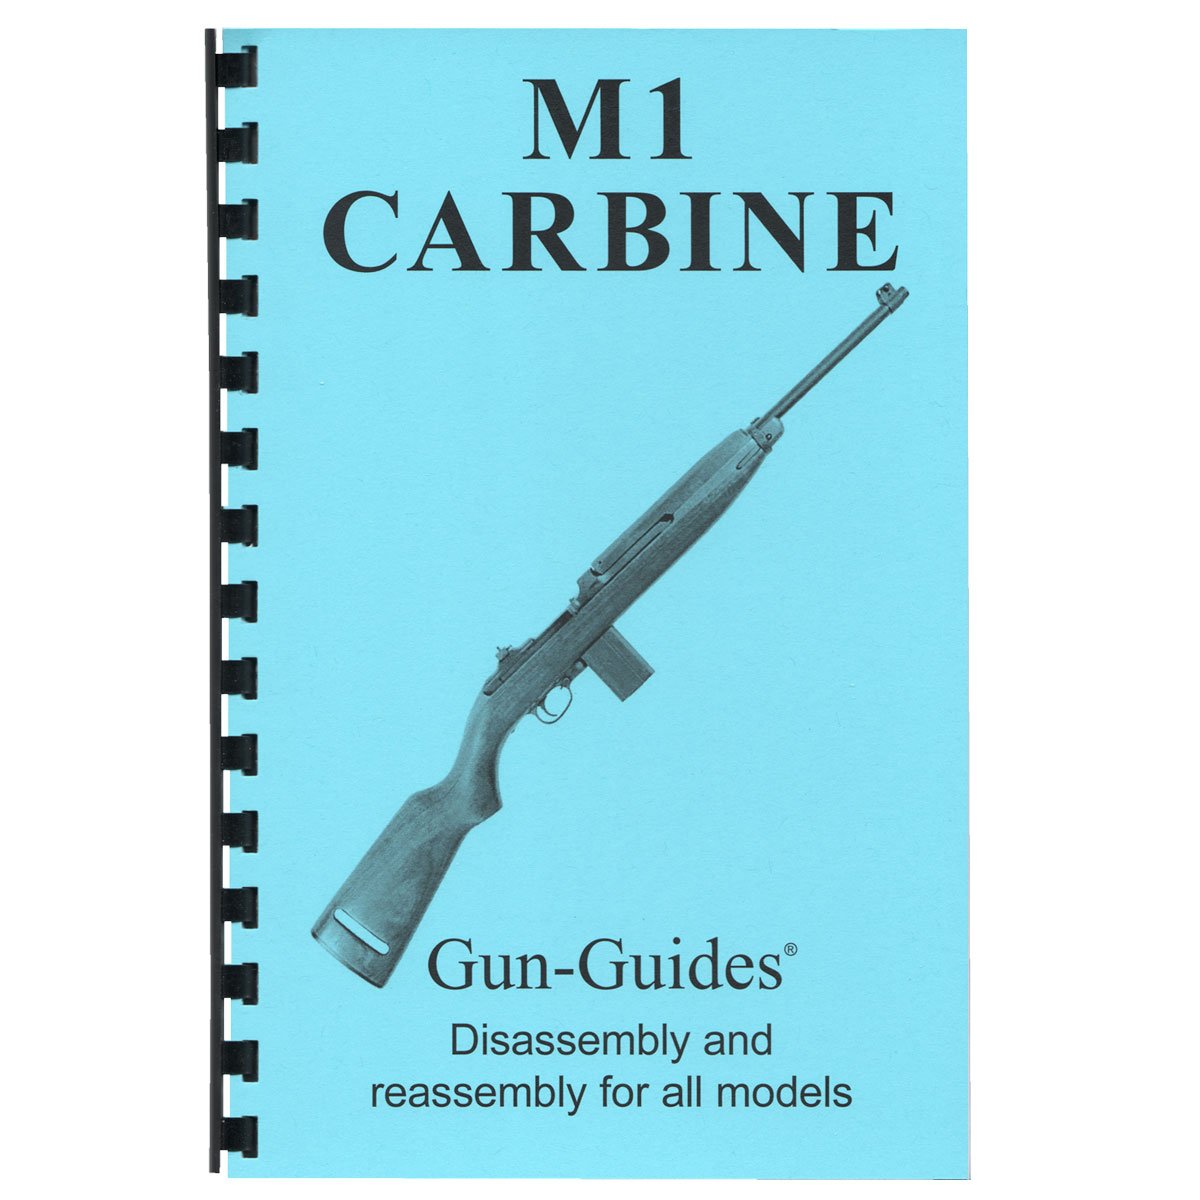 GUN-GUIDES - ASSEMBLY AND DISASSEMBLY FOR THE M1 CARBINE